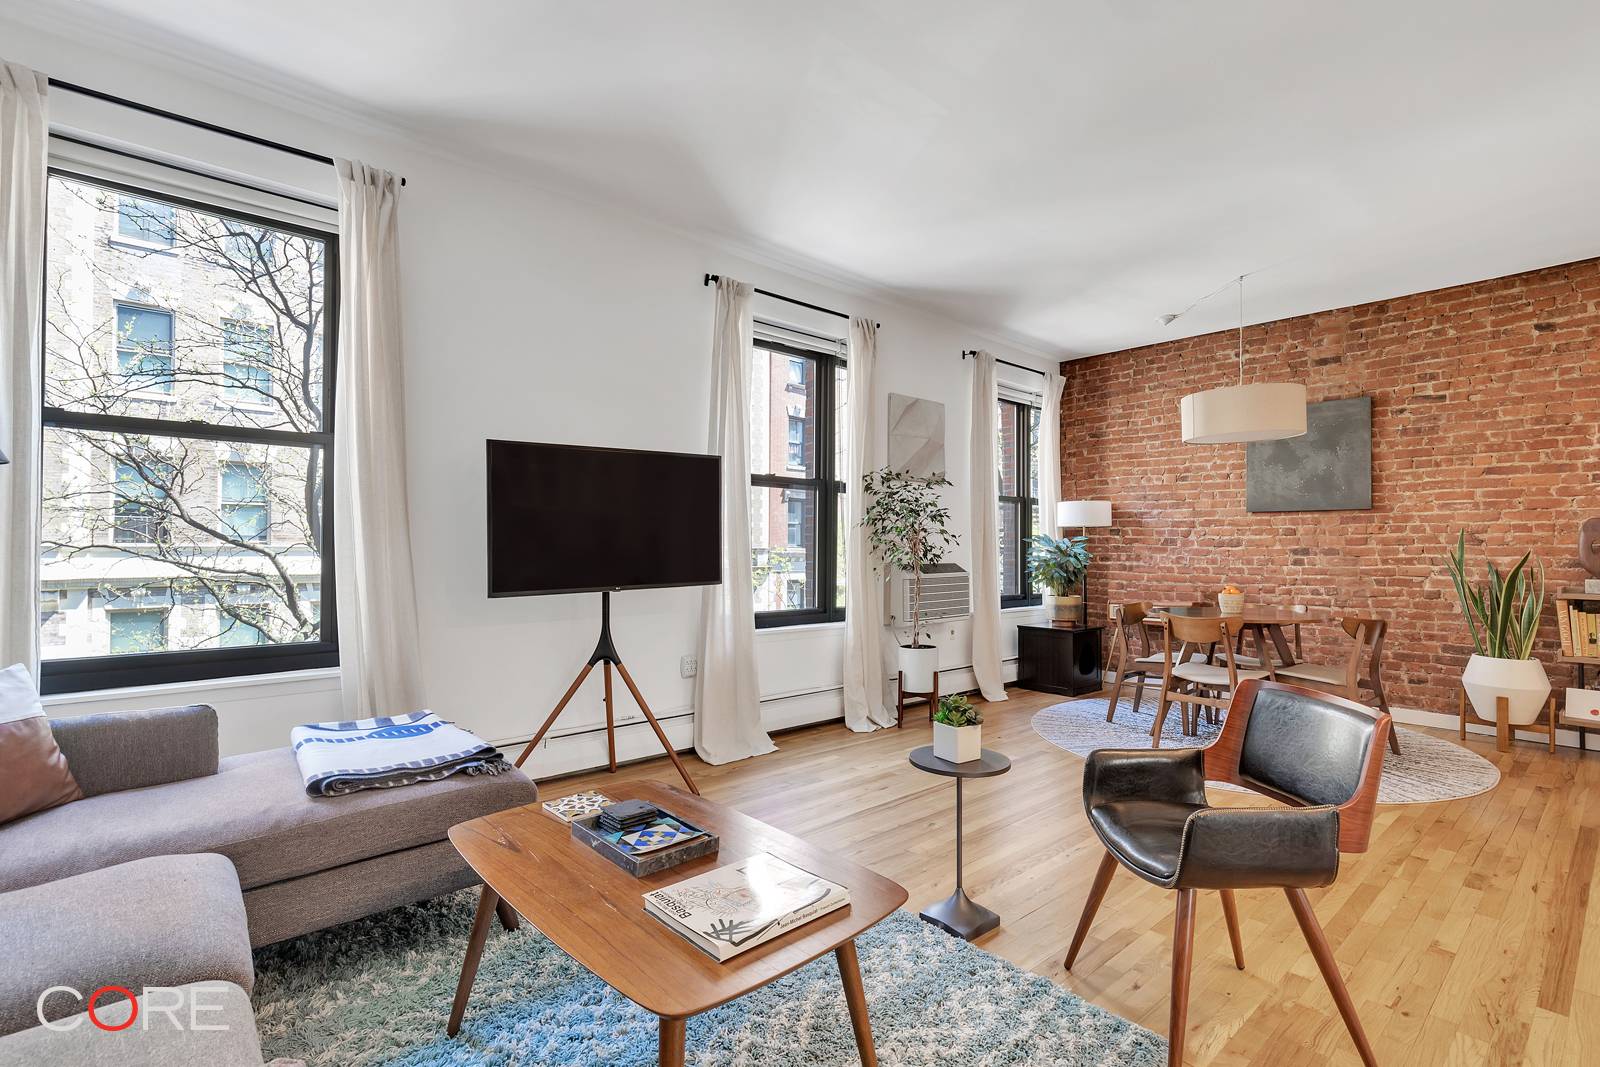 Charm and character abound in this chic and spacious, renovated one bedroom beauty just off Riverside Park.